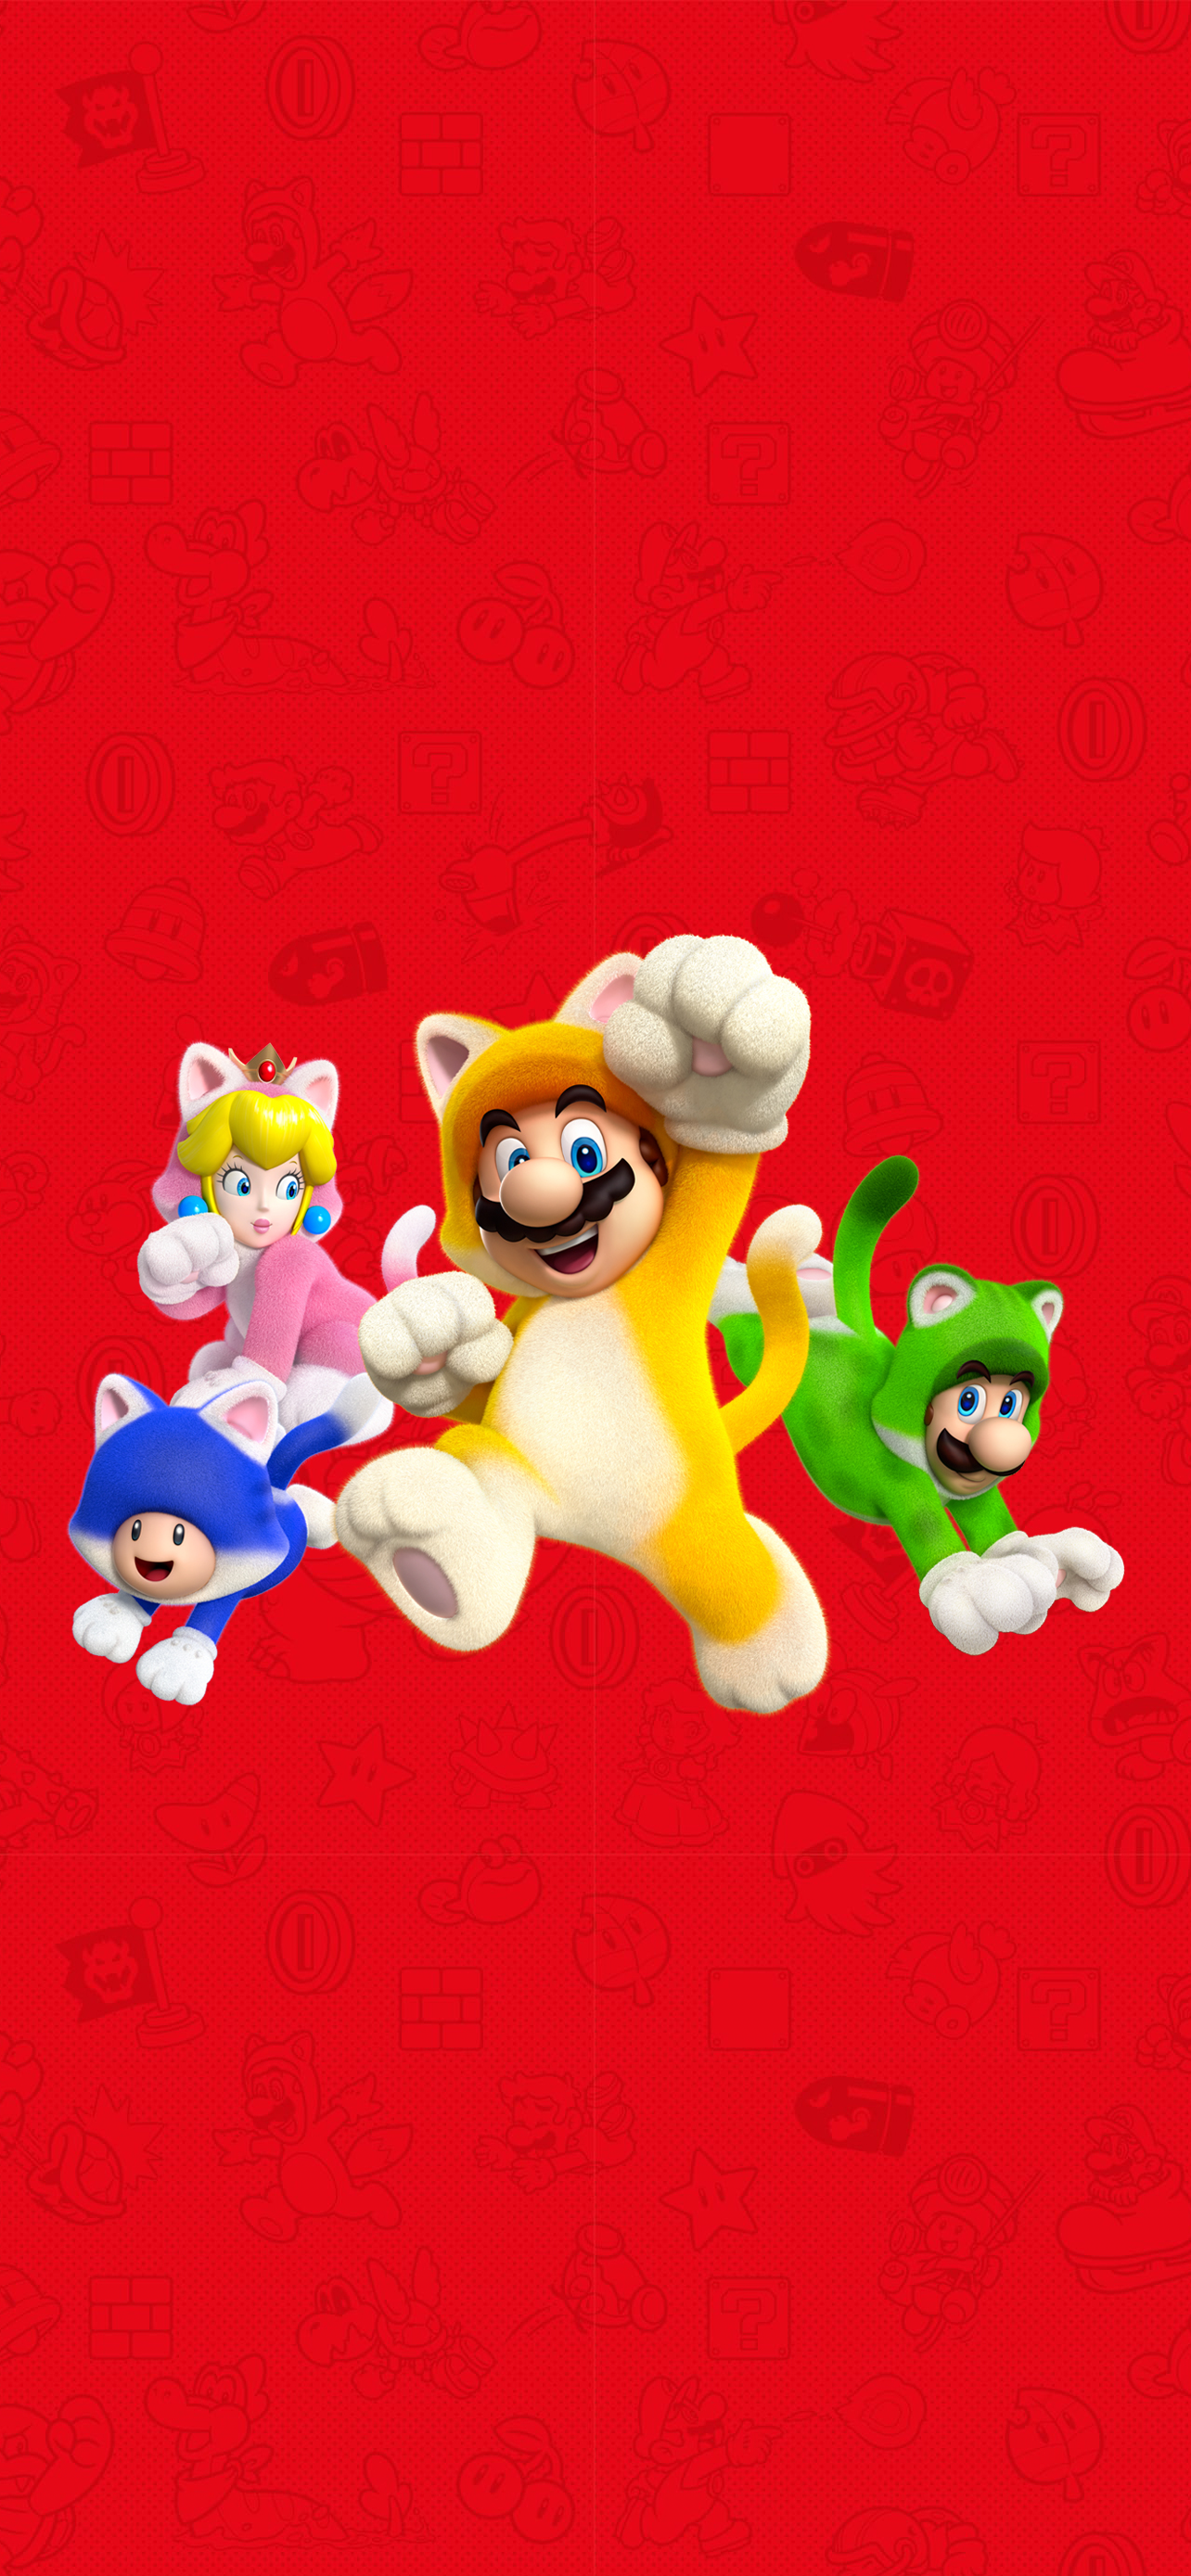 Super Mario 3D World - Cover Art Wallpaper - Cat with Monocle